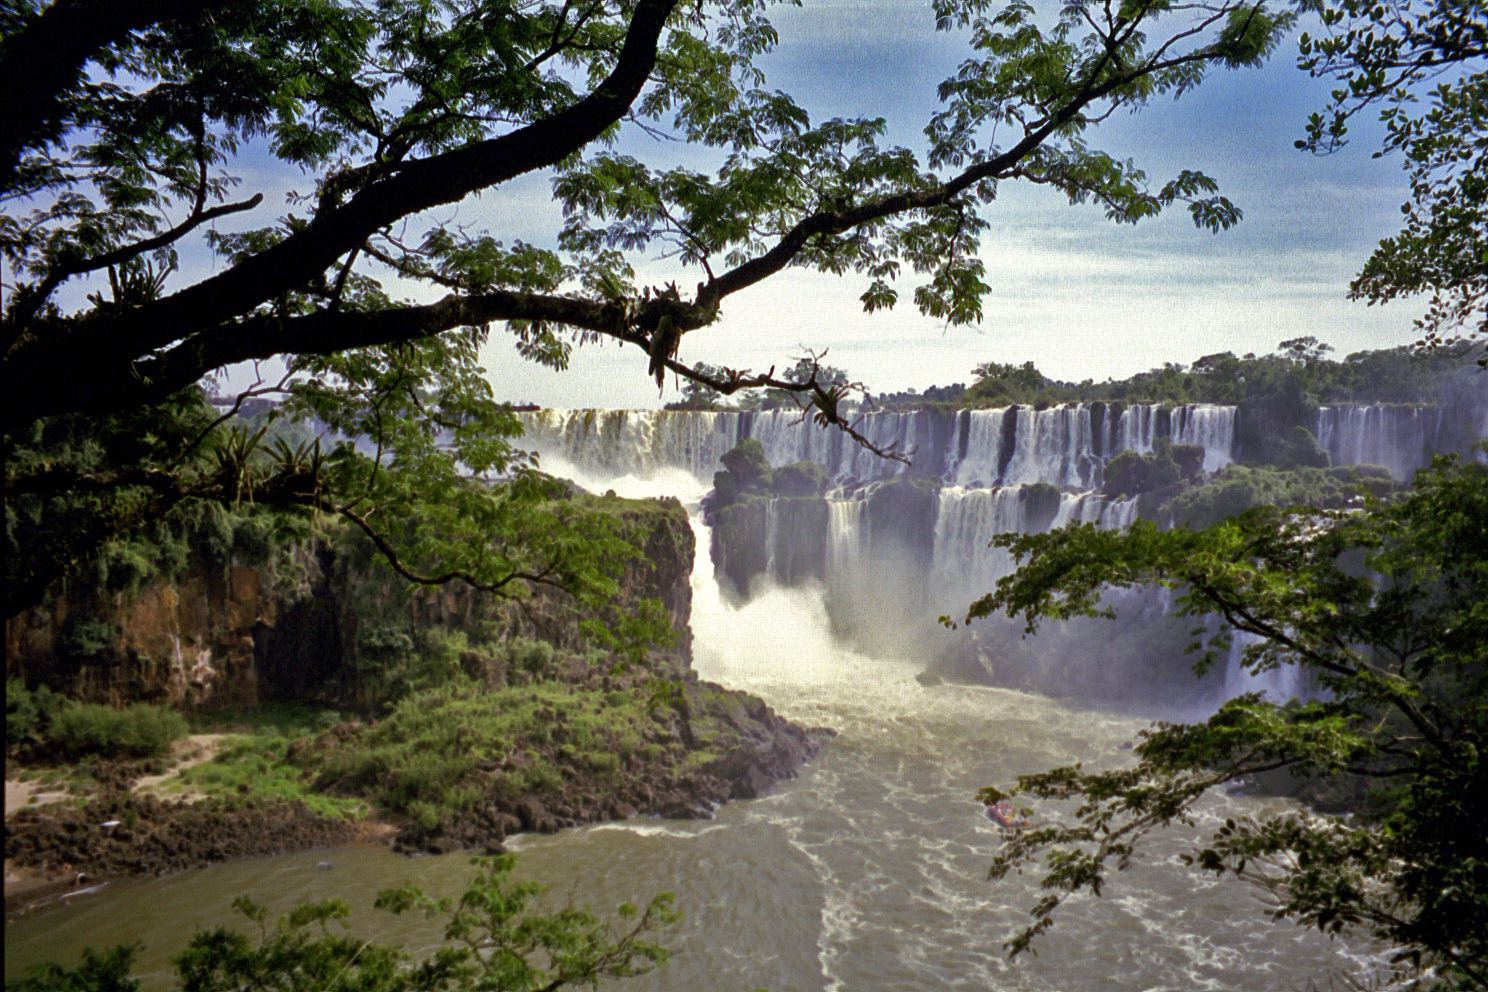 the Argentine side of Iguazu Falls (note: this image is not suitable for large prints)